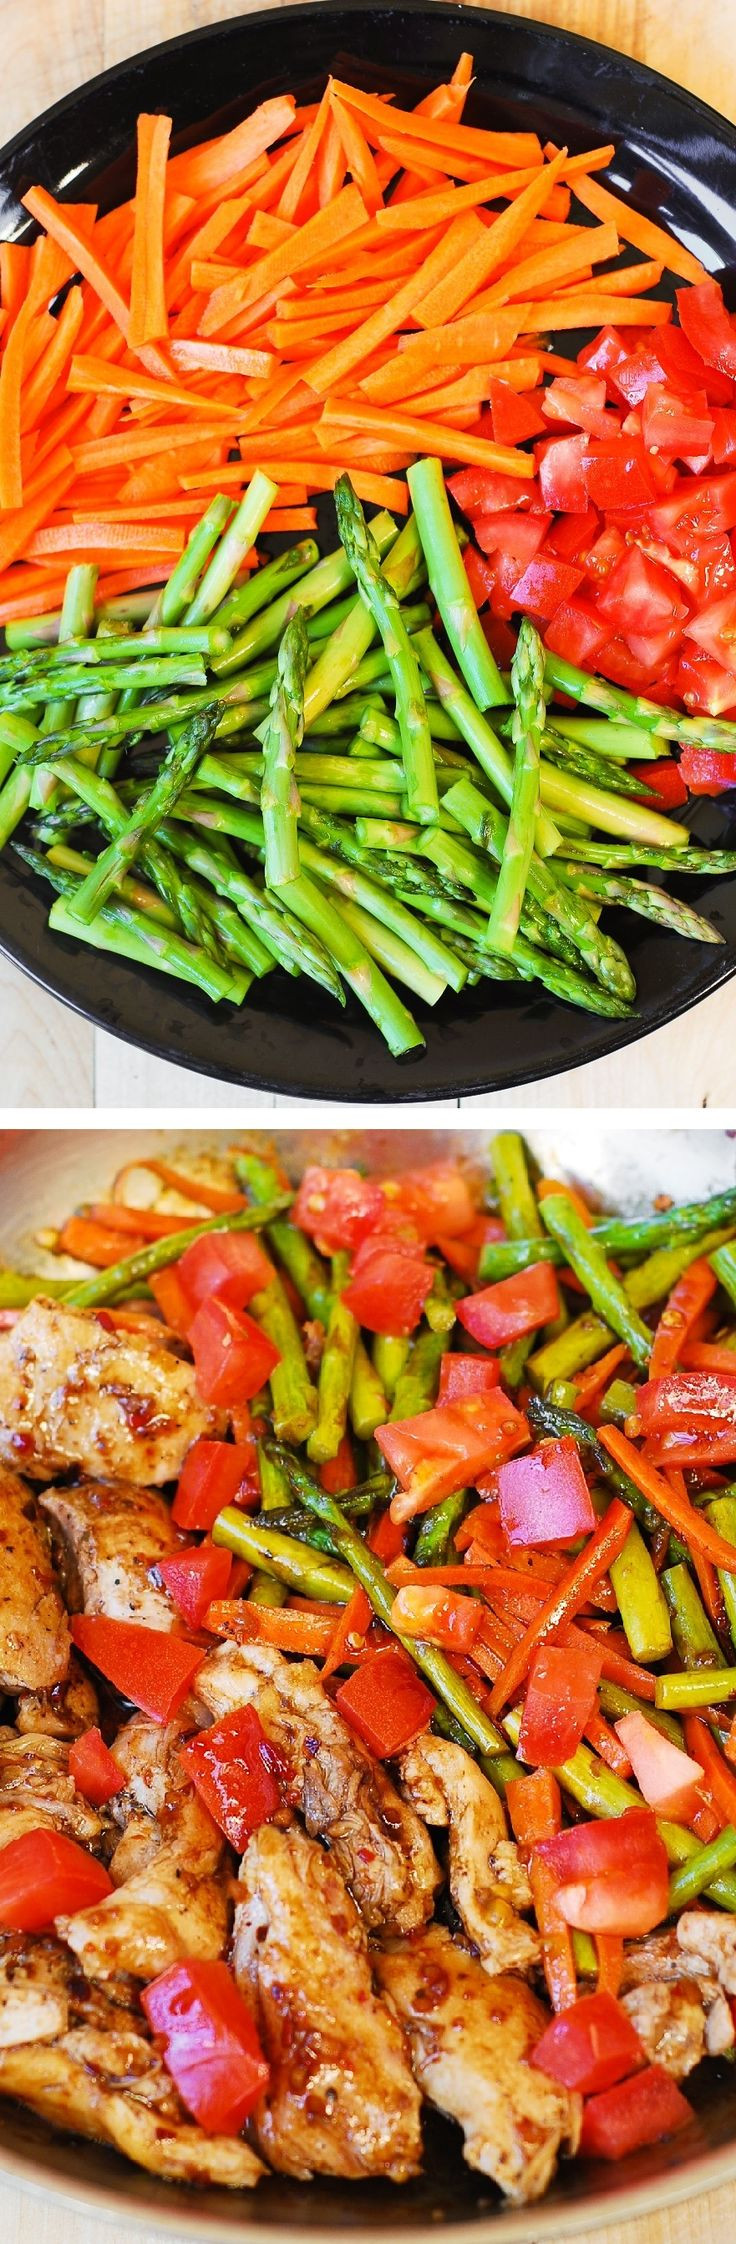 Low Cholesterol Dinners
 175 best images about low or no salt recipes on Pinterest